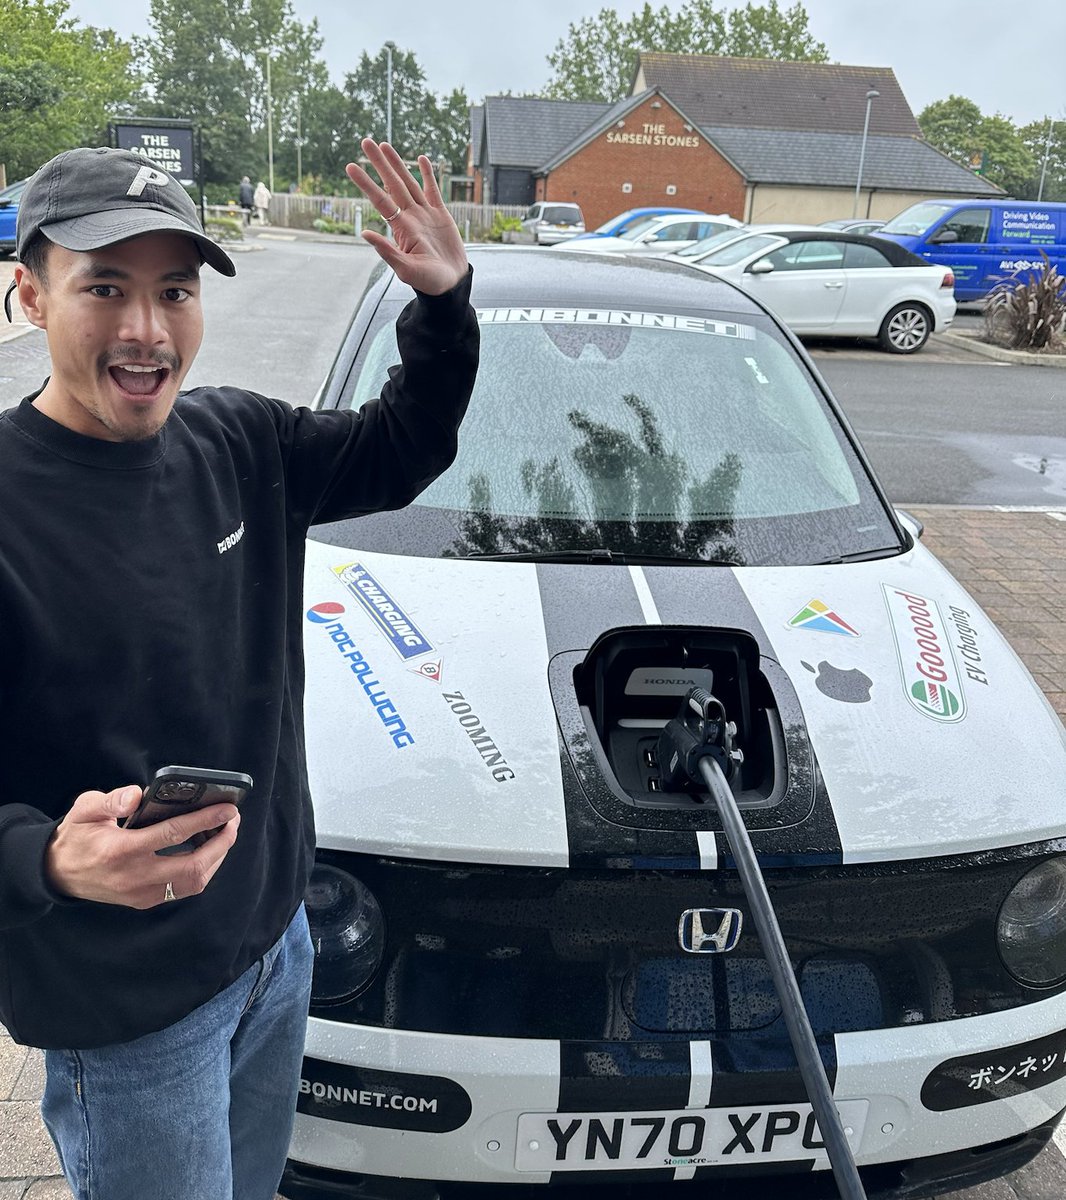 That feeling when you realise you're one day closer to the weekend 🤩 Where are you going in your EV this weekend?! 🚗🔋 #evcharging #evchargingapp #bonnet #joinbonnet #electriccar